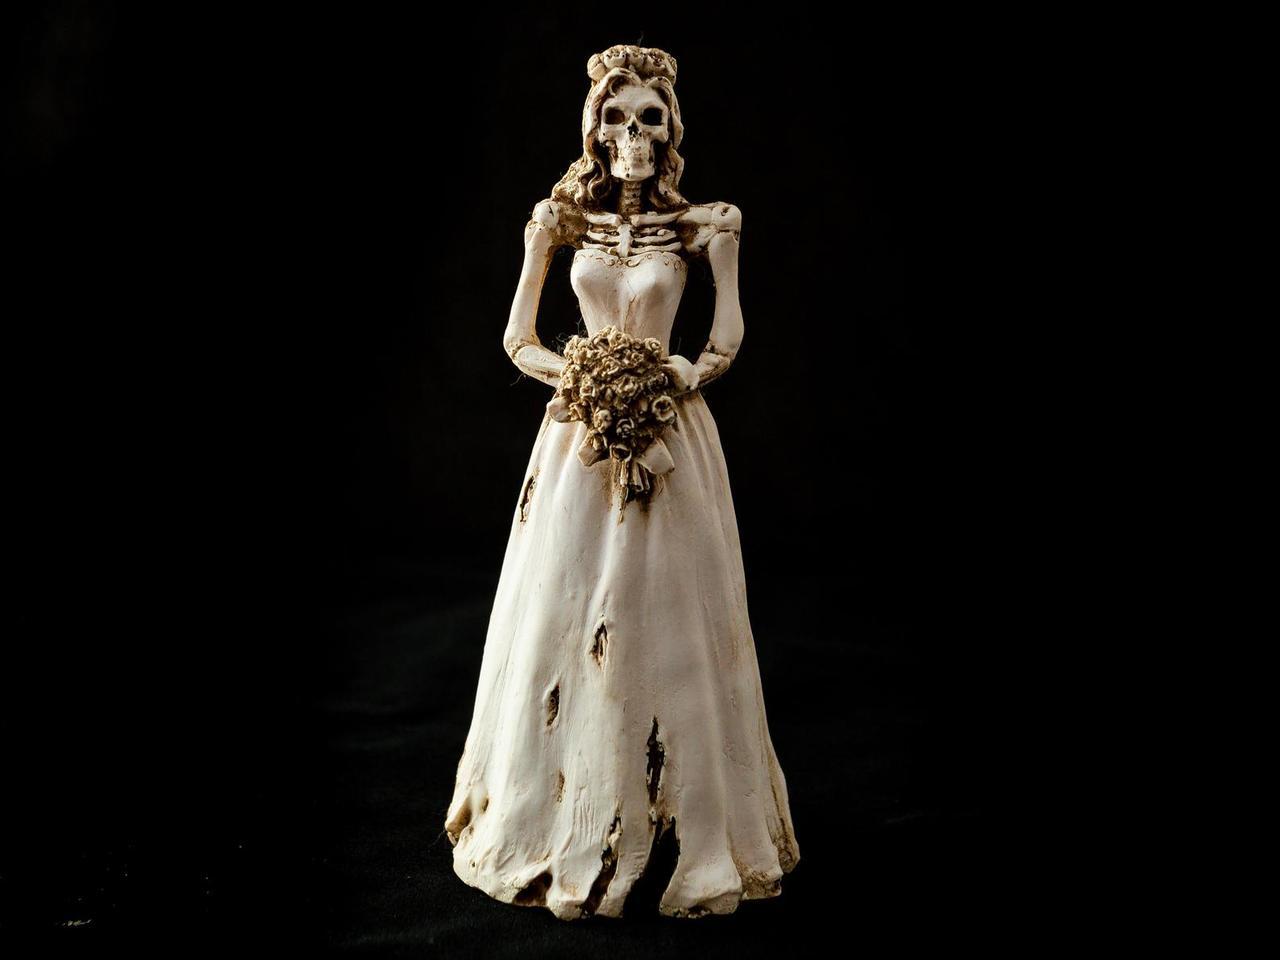 hominnimoh: sixpenceee: This is a beautiful sculpture of a gothic style bride in